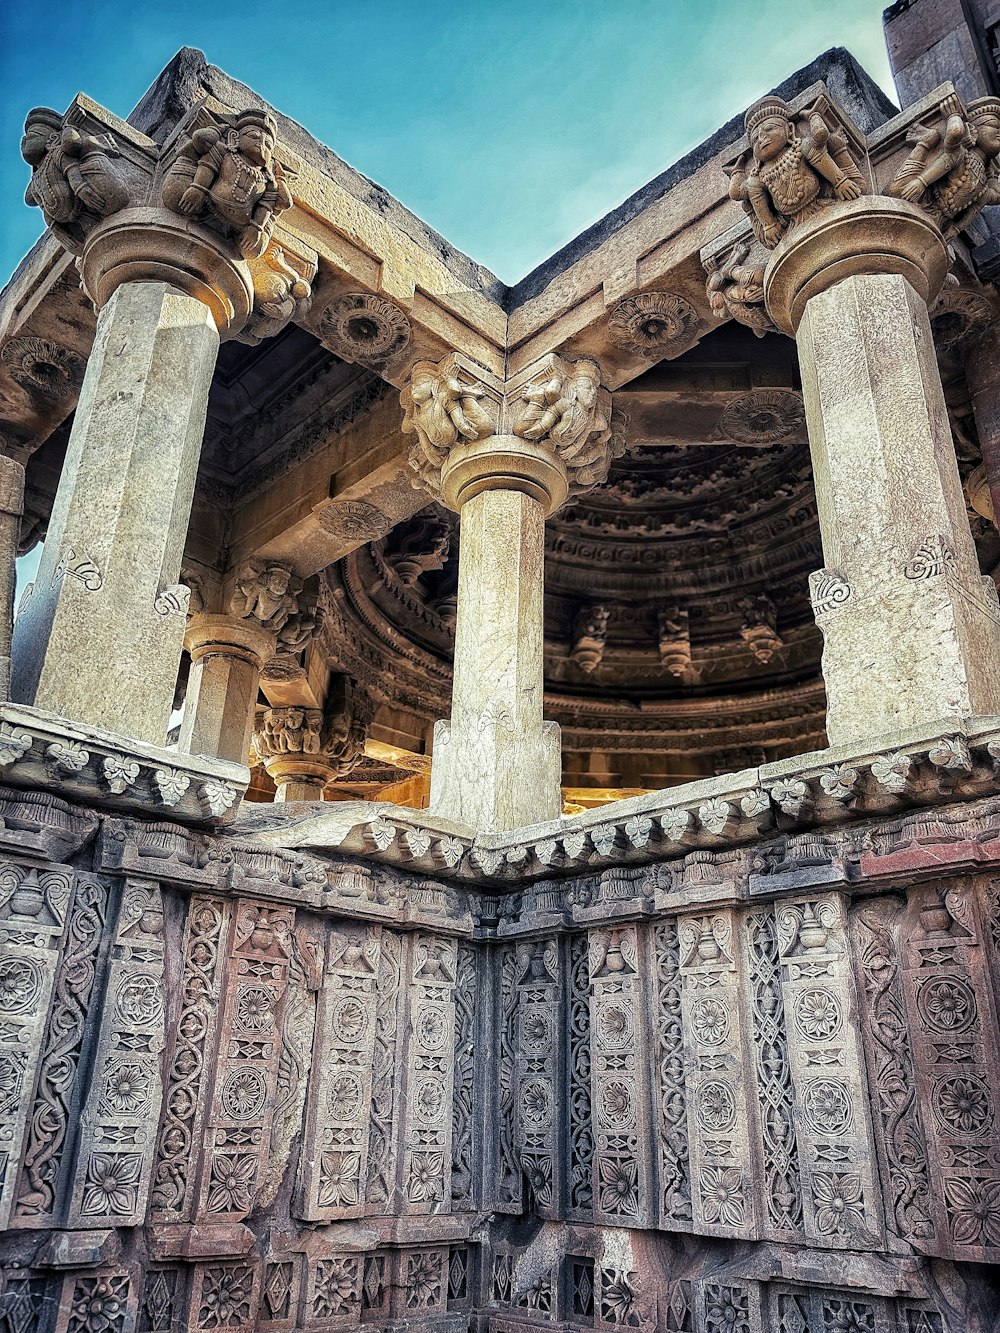 a stone structure with pillars and carvings on it